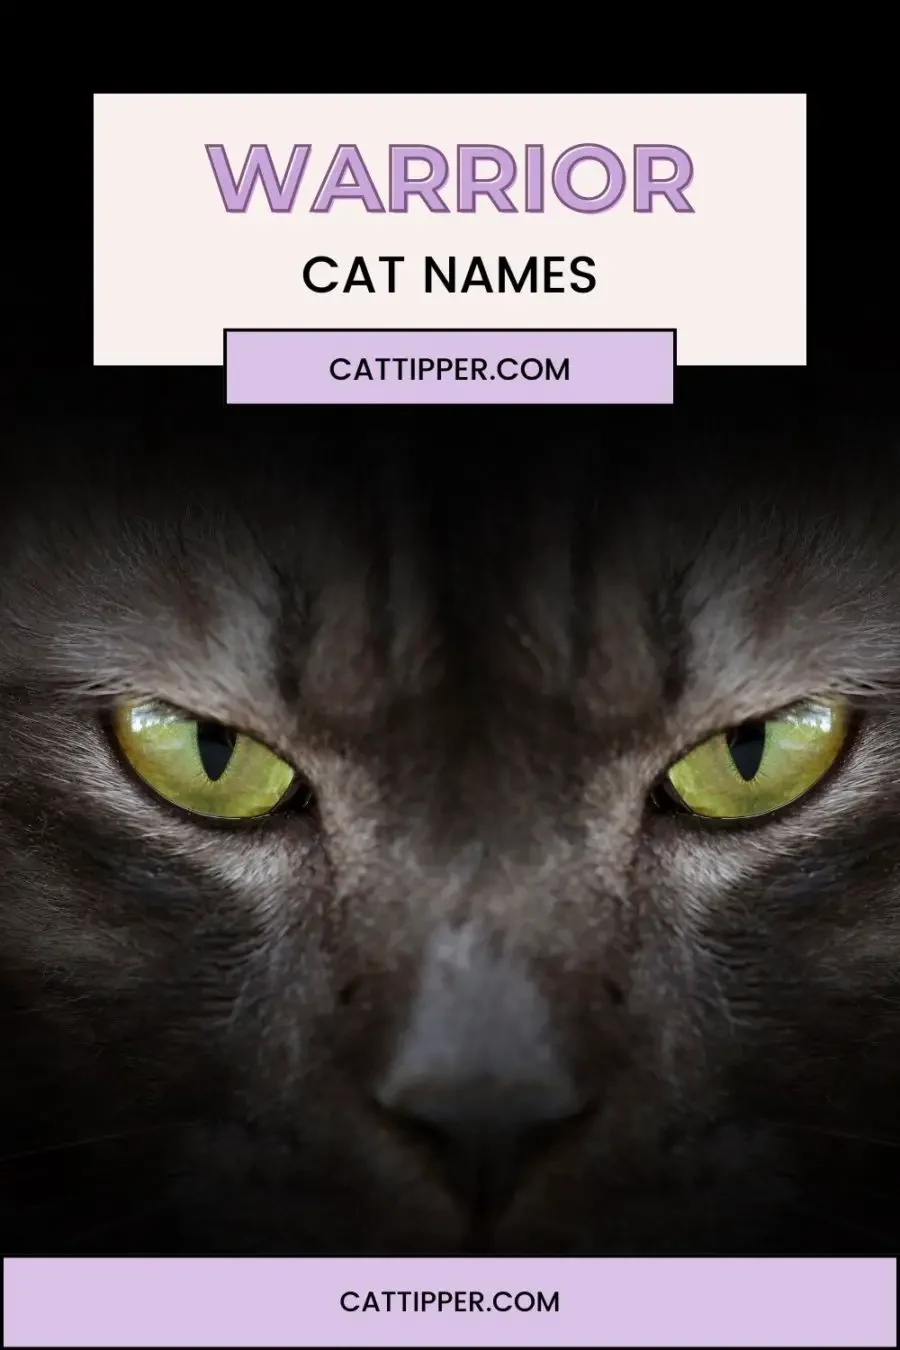 How to create a warrior cat name for your cat inspired by the popular book series